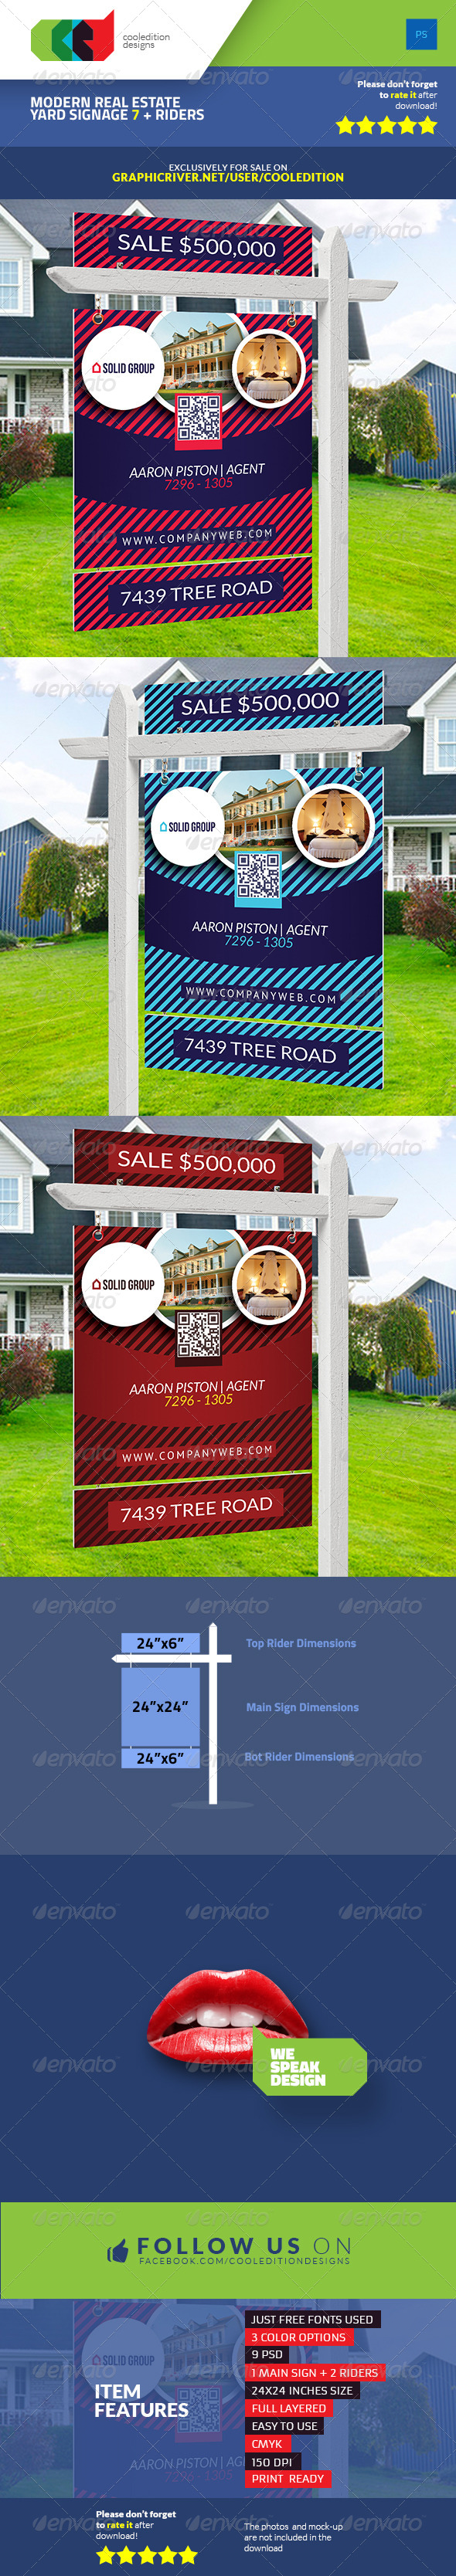 Download Modern Real Estate Yard Signage 7 + Riders | GraphicRiver